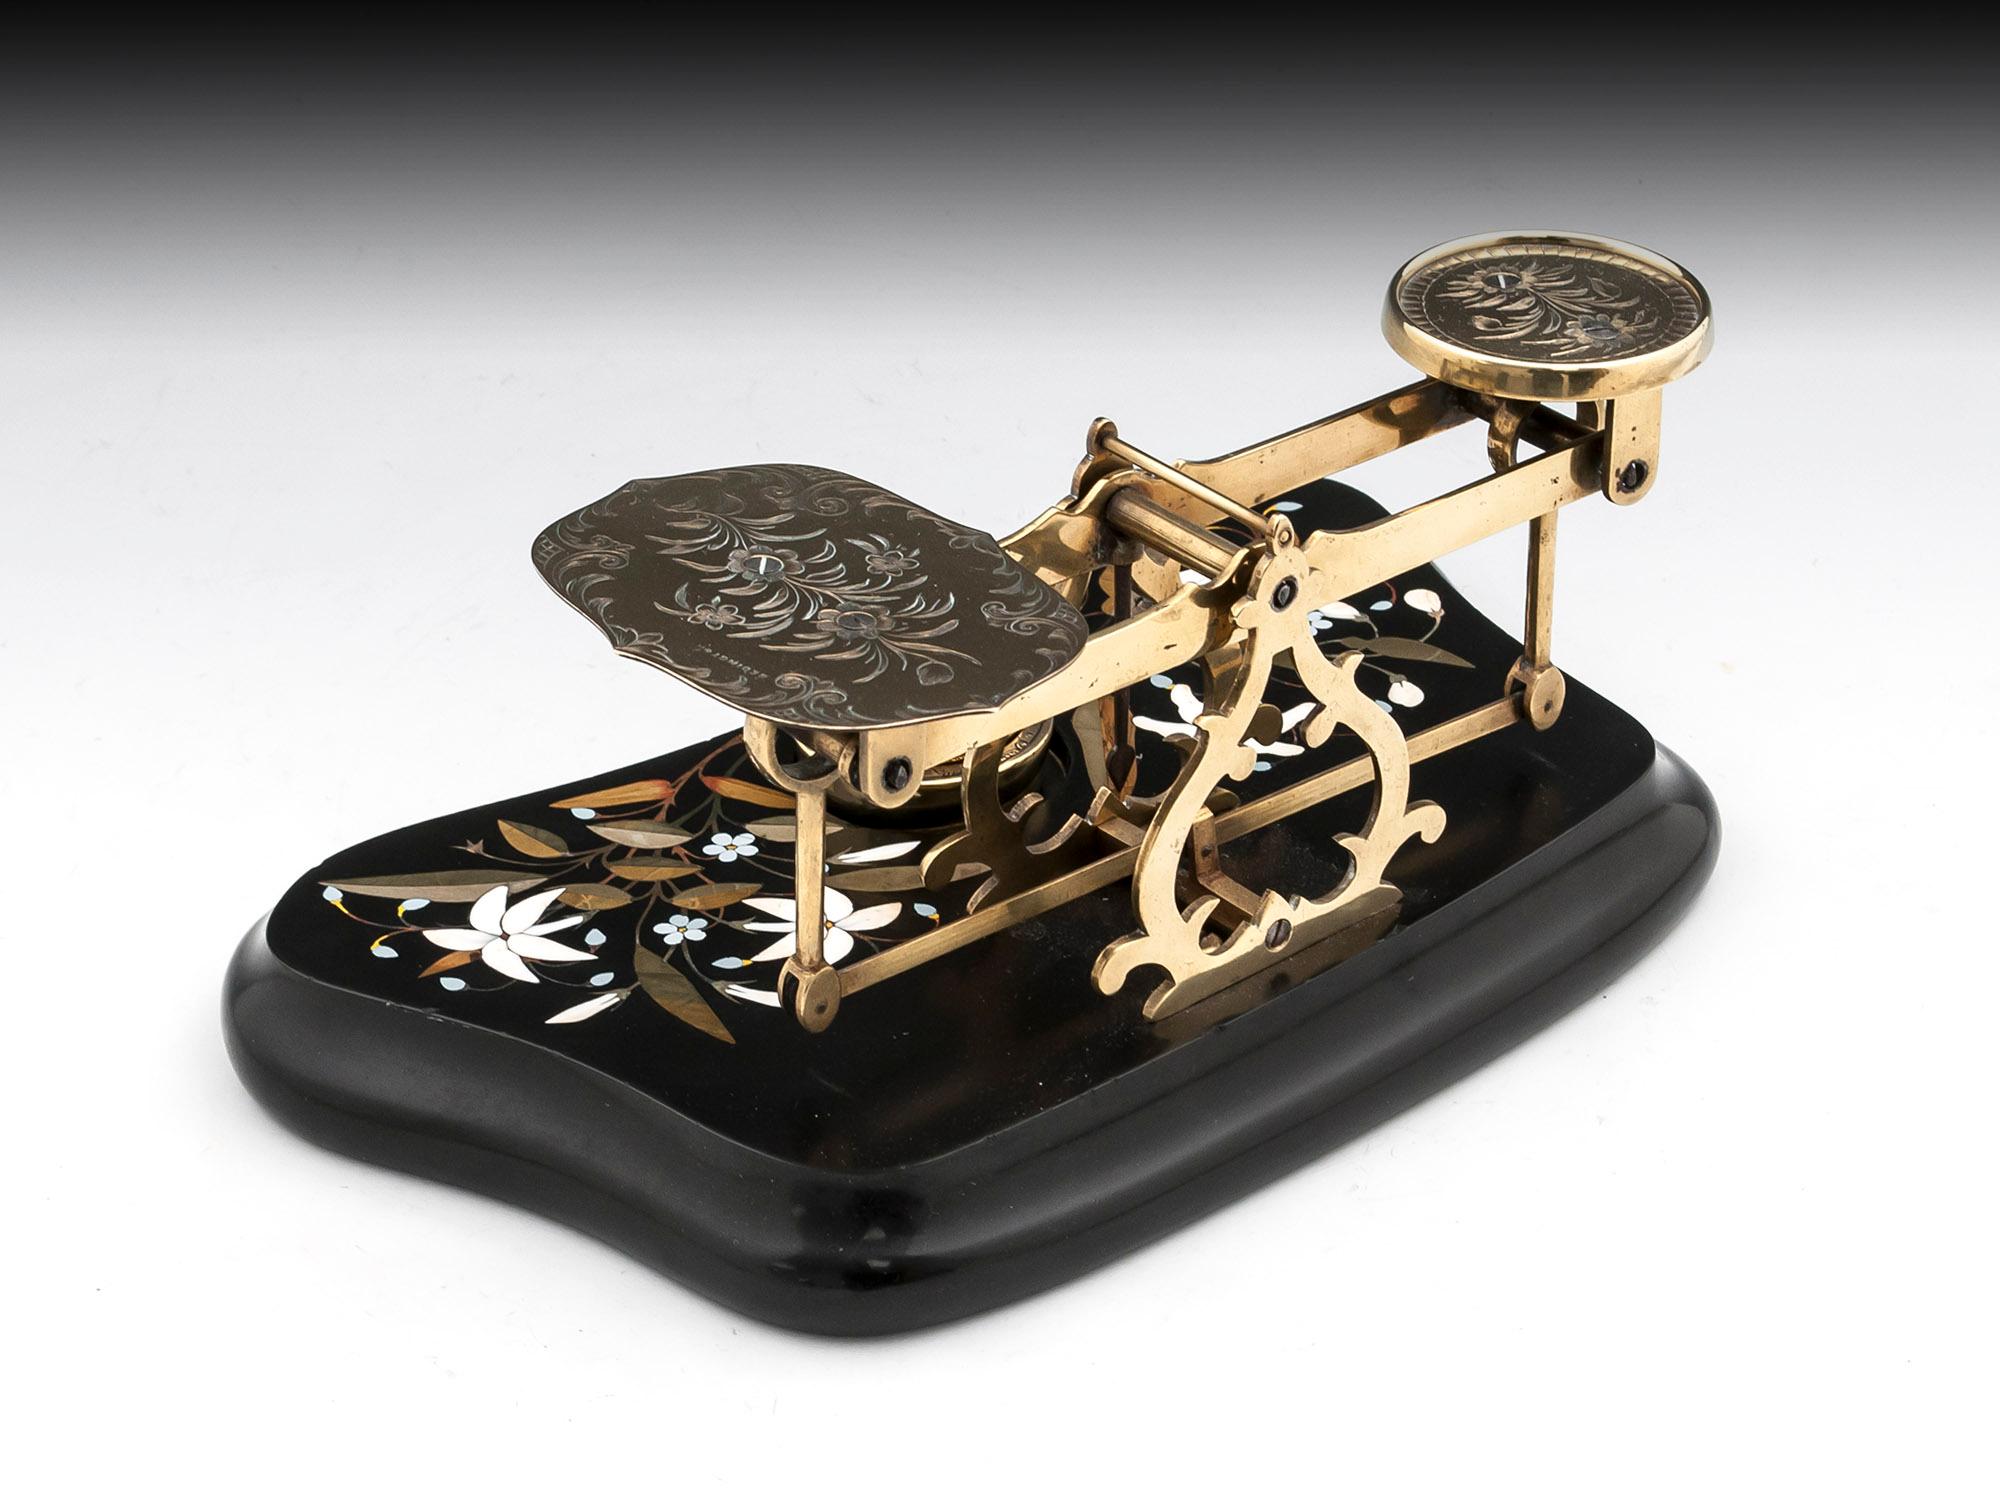 Antique Postal Scales Brass Engraved Pietra Dura, 19th Century In Good Condition For Sale In Northampton, United Kingdom